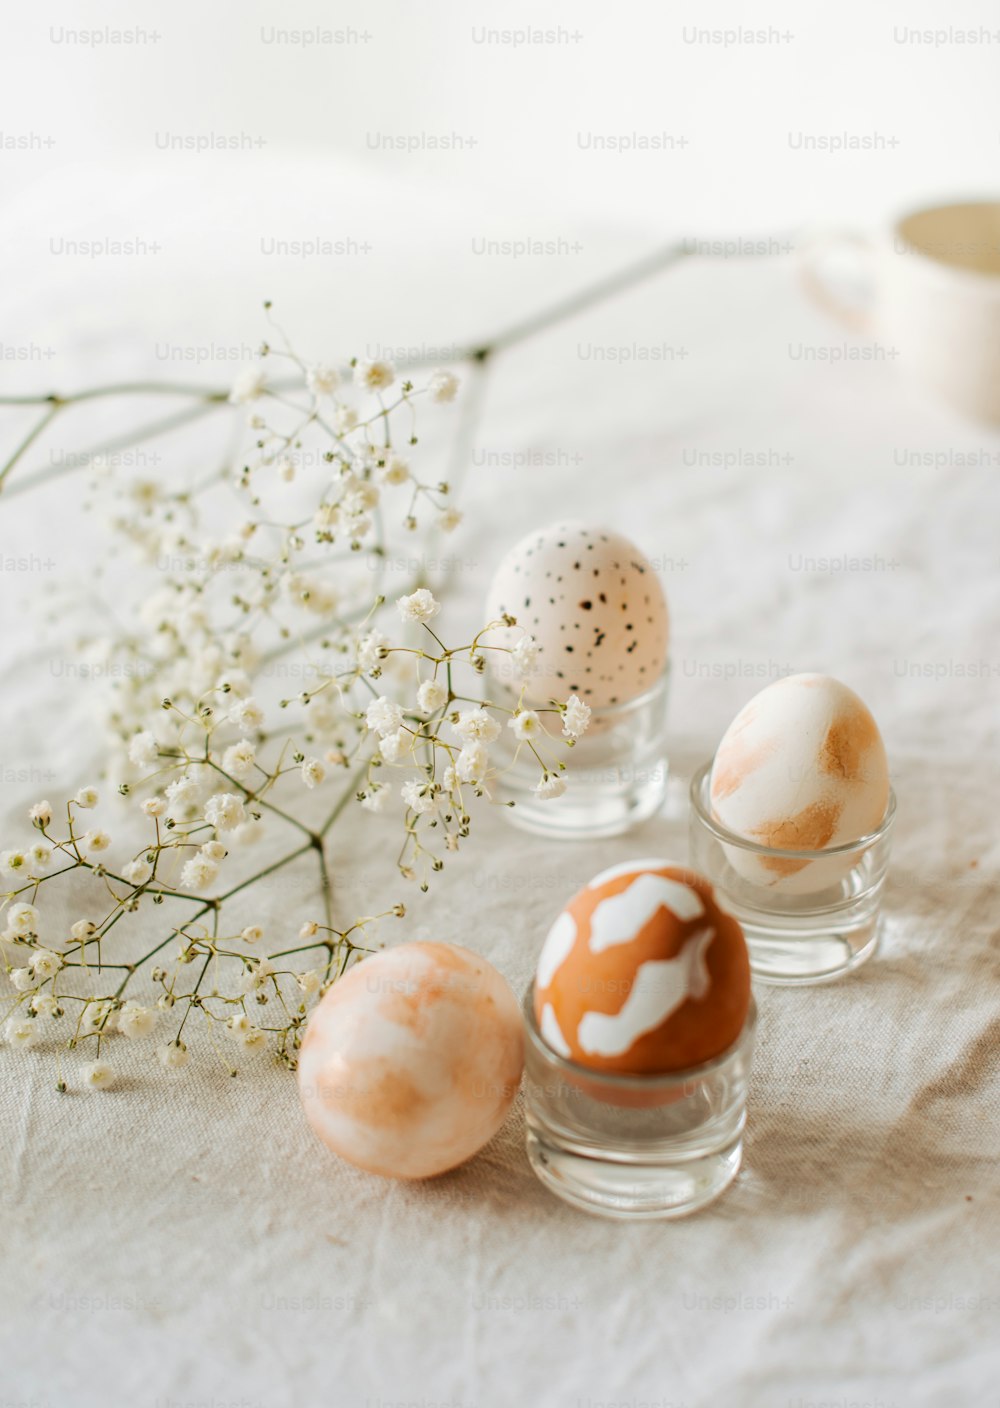 three glass vases filled with painted eggs on a table